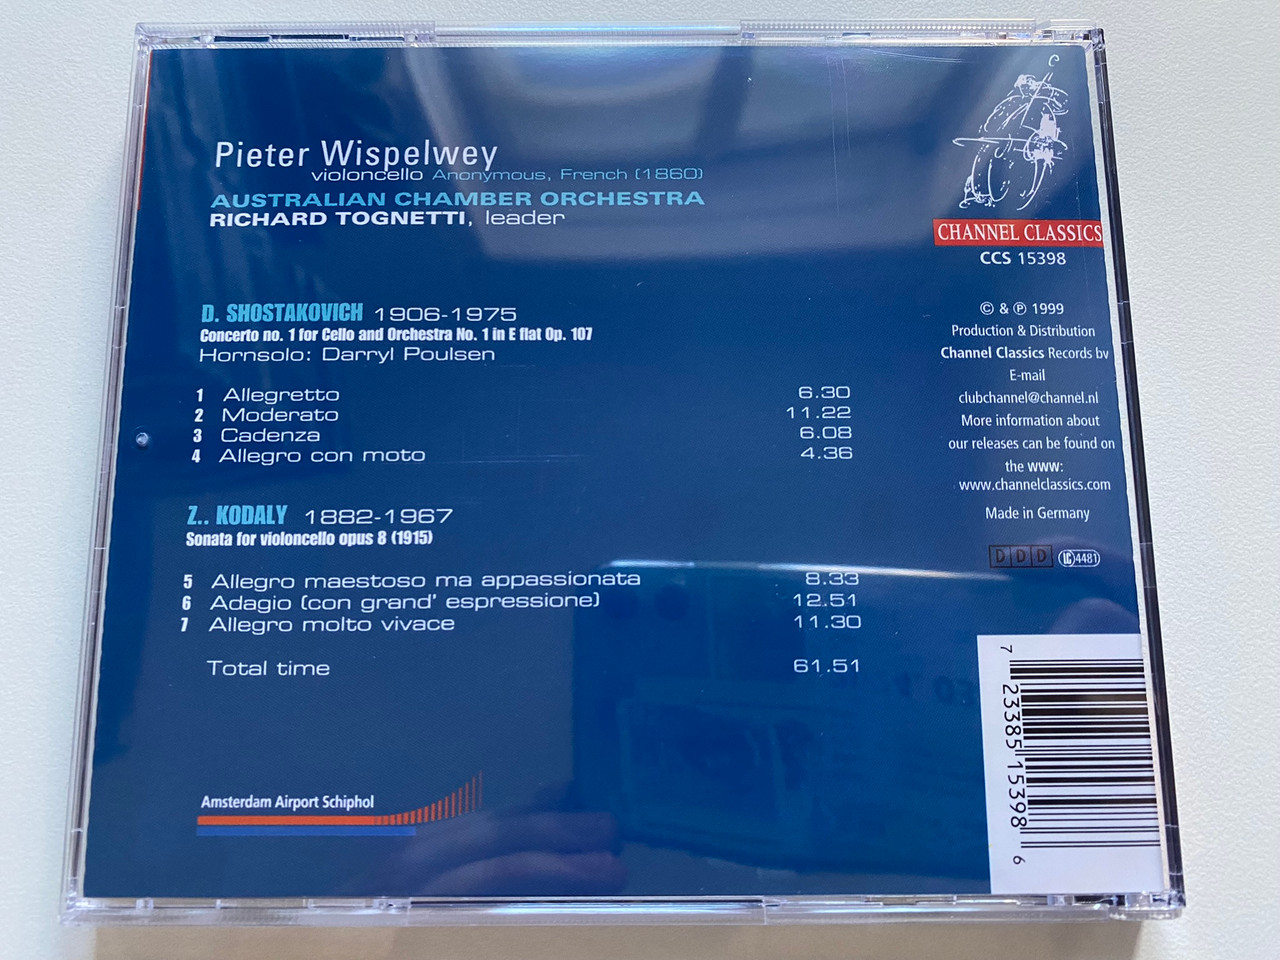 https://cdn11.bigcommerce.com/s-62bdpkt7pb/products/0/images/328099/Pieter_Wispelwey_violoncello_Australian_Chamber_Orchestra_-_D._Schostakovich_Concerto_No._1_For_Cello_And_Orchestra_Z._Kodaly_Sonata_For_Cello_Solo_Opus_8_Channel_Classics_Audio_CD__78980.1710833387.1280.1280.jpg?c=2